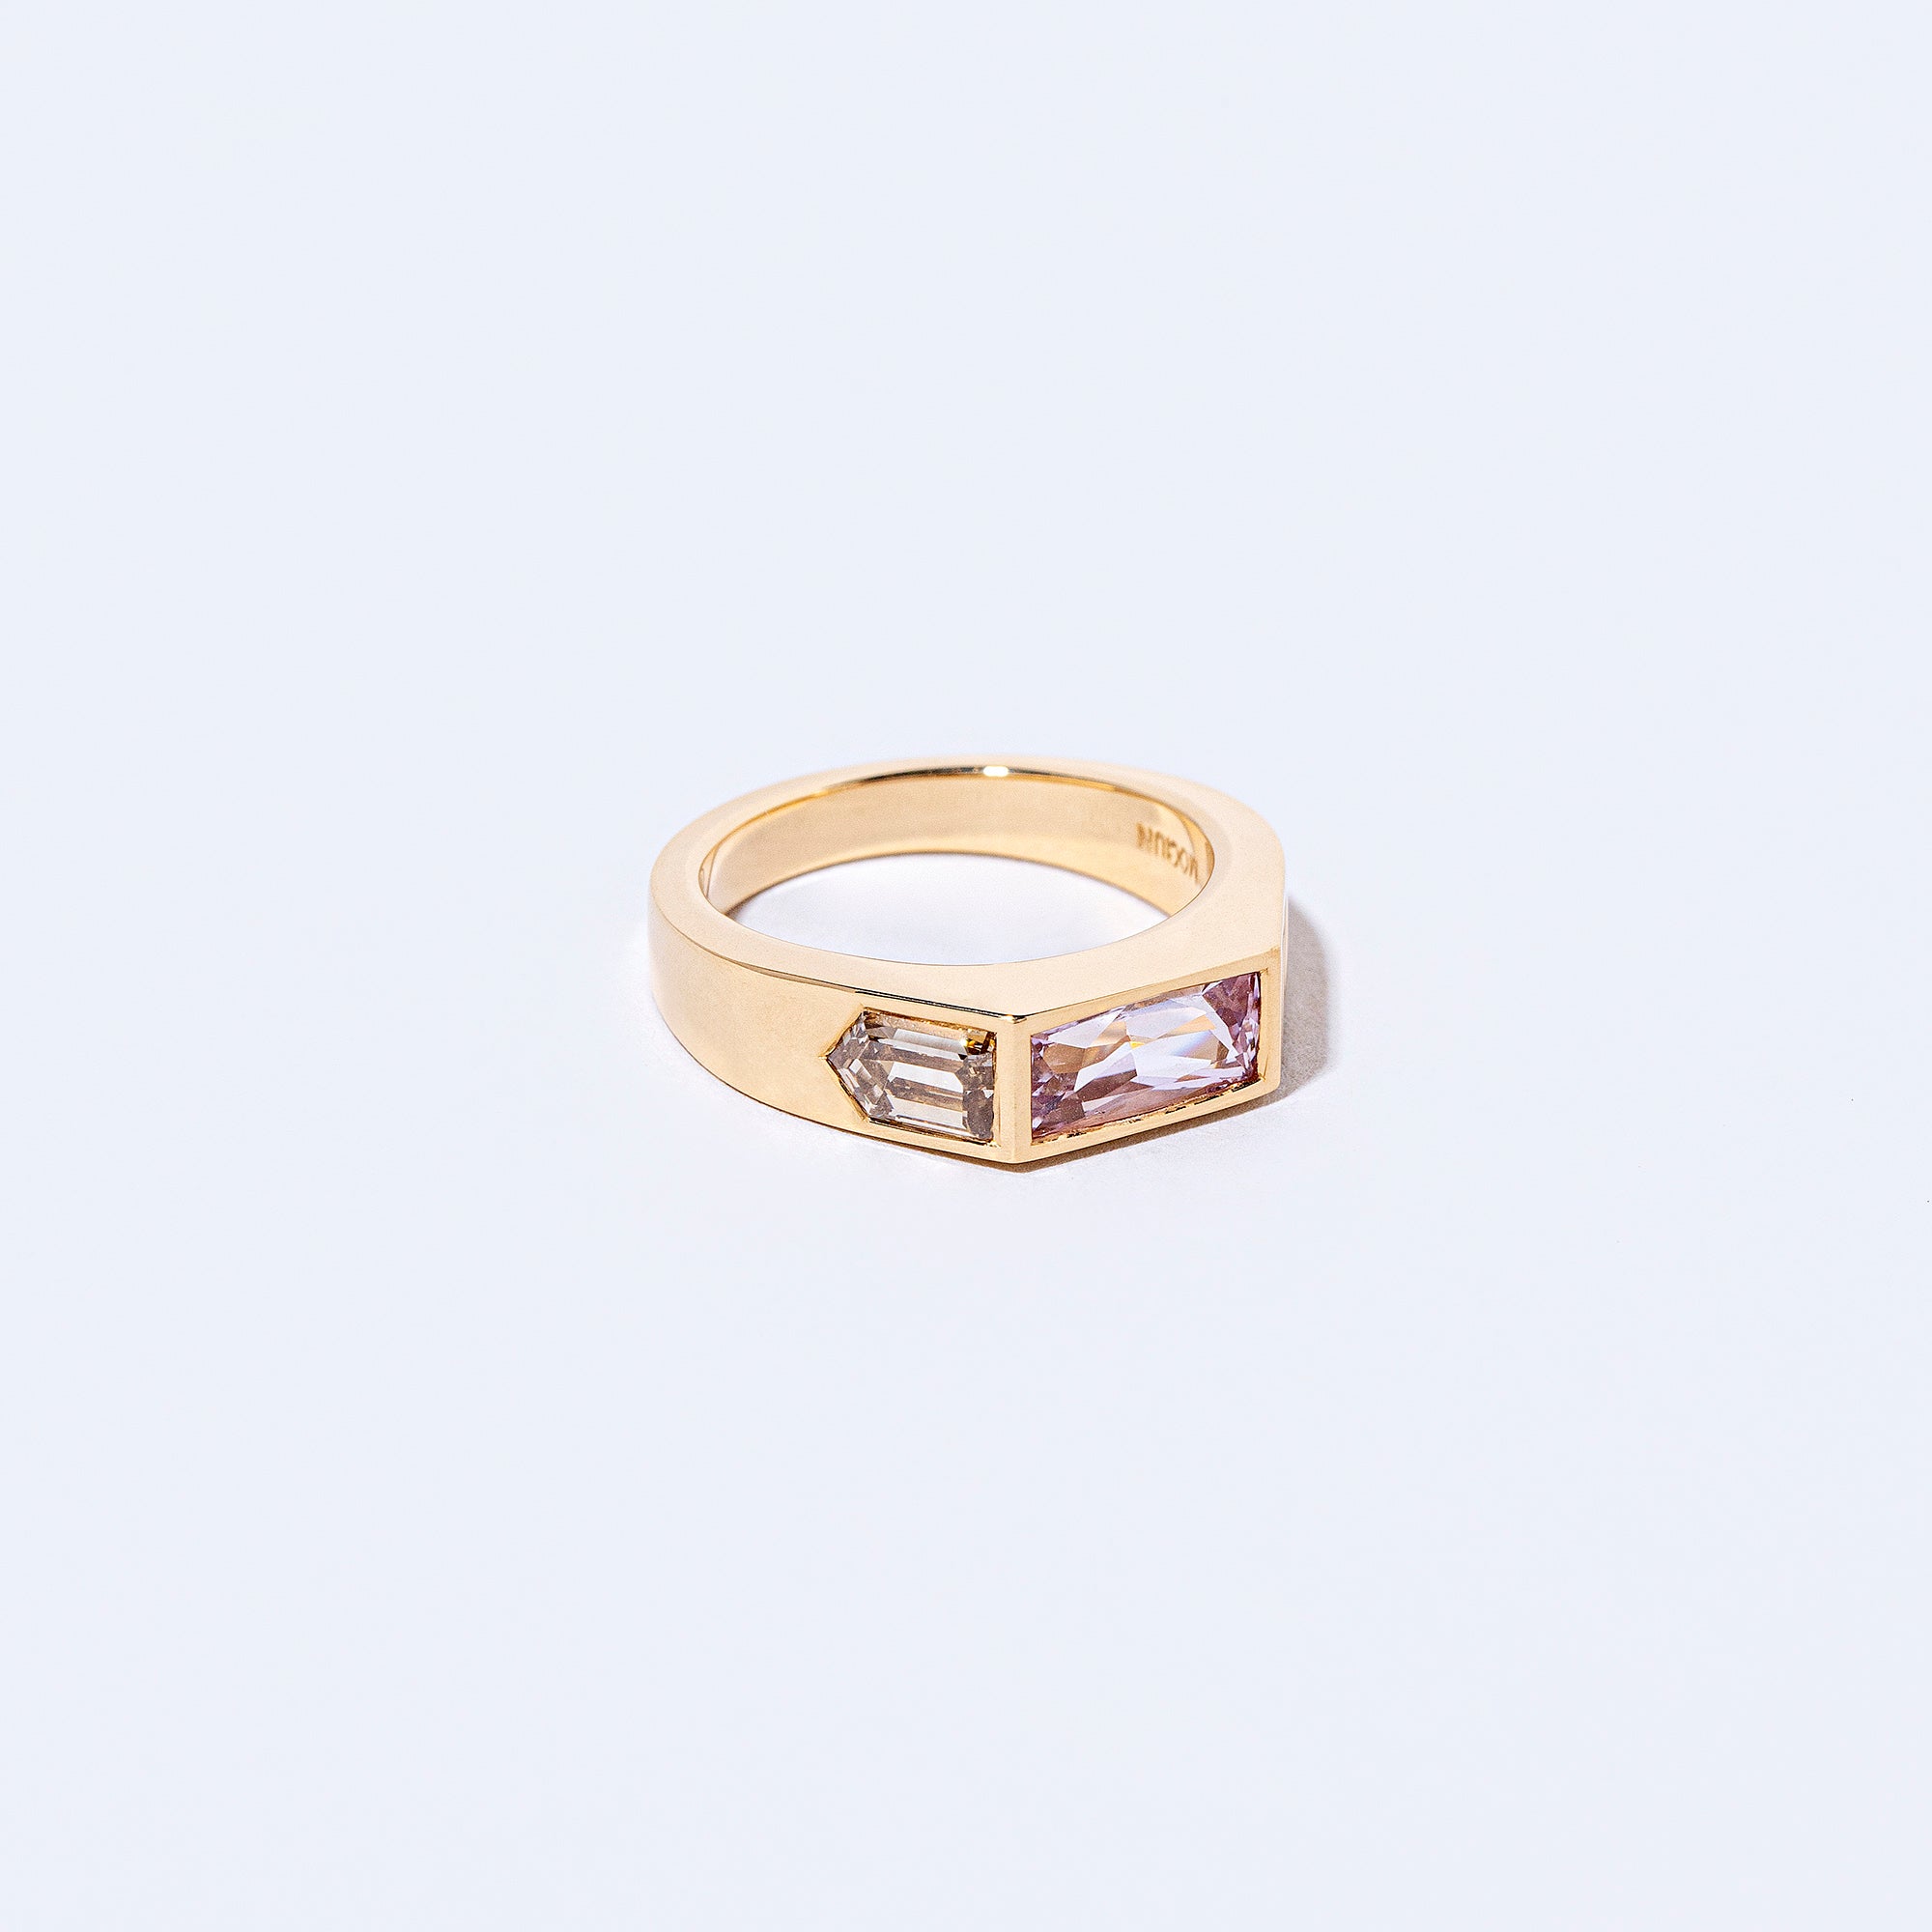 product_details:: Hume's Ring on light color background.